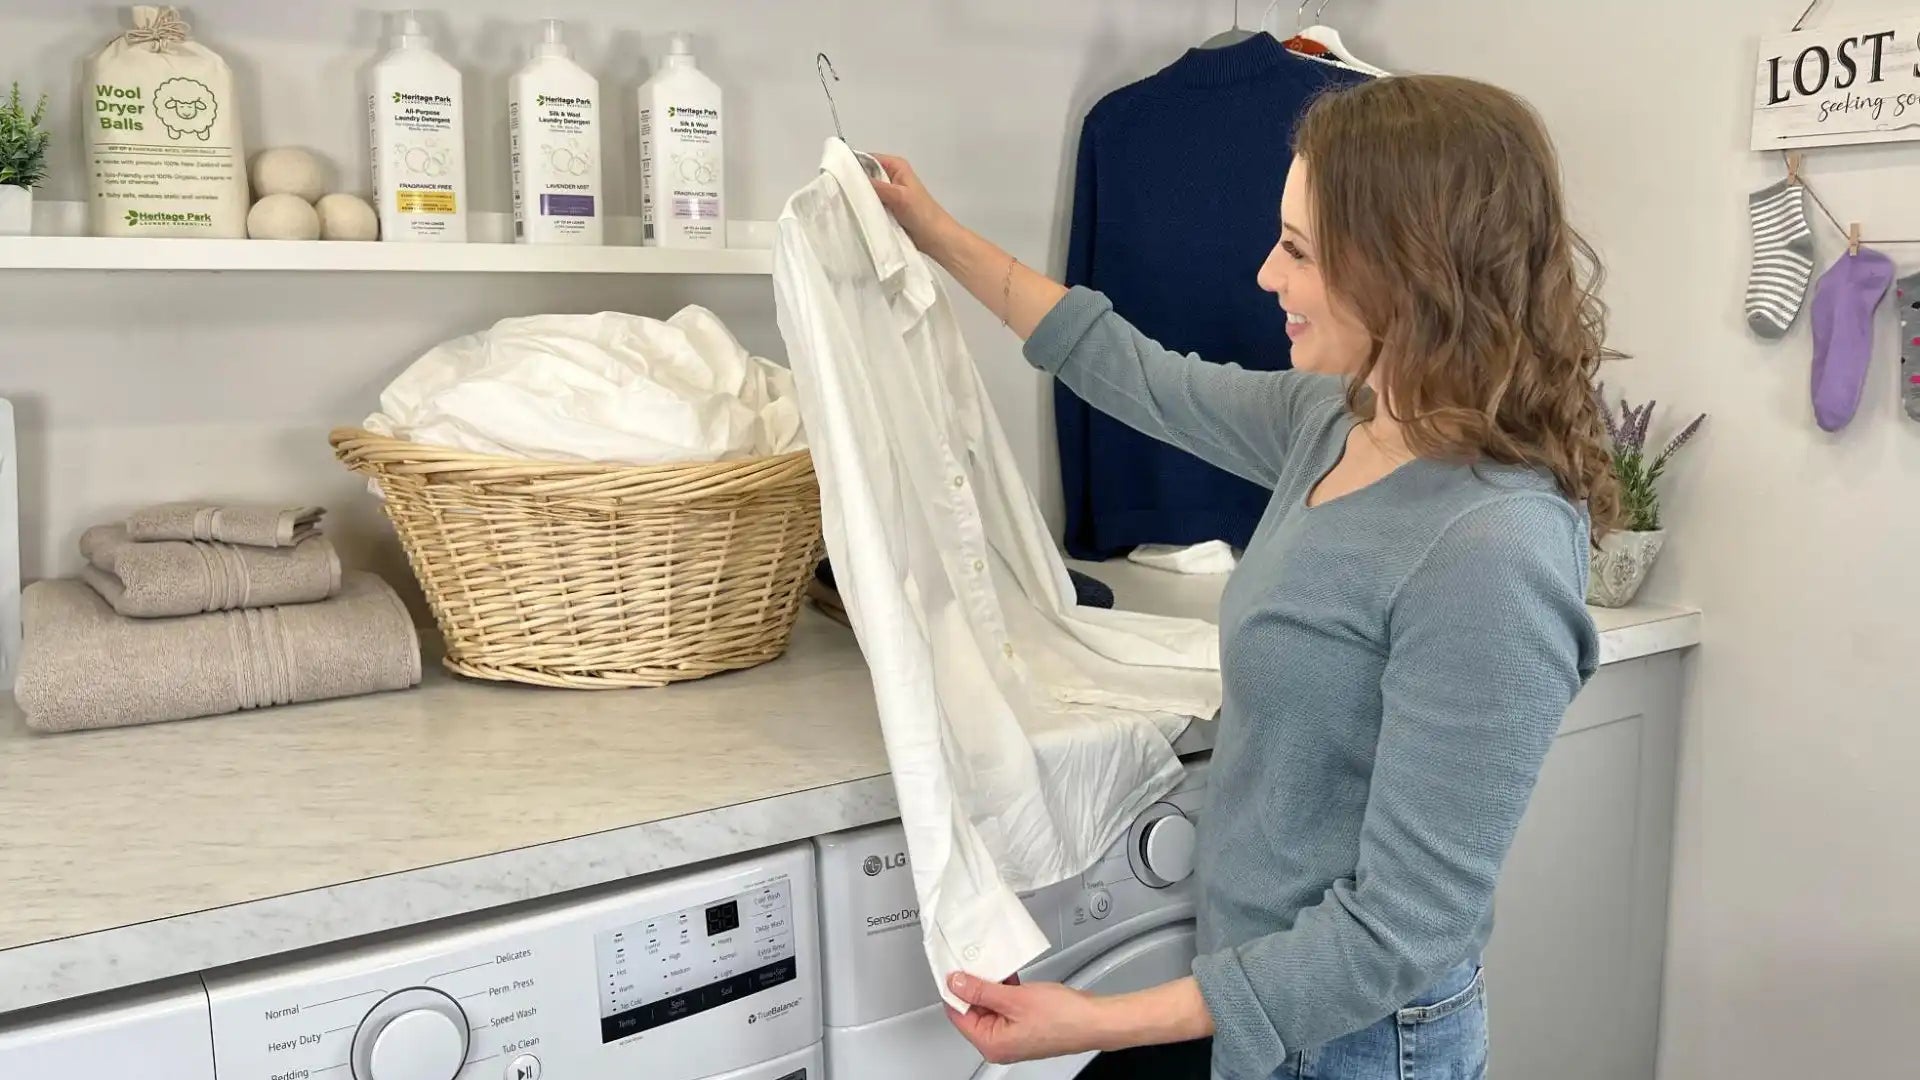 How To Wash Your Compression Stockings - Heritage Park Laundry